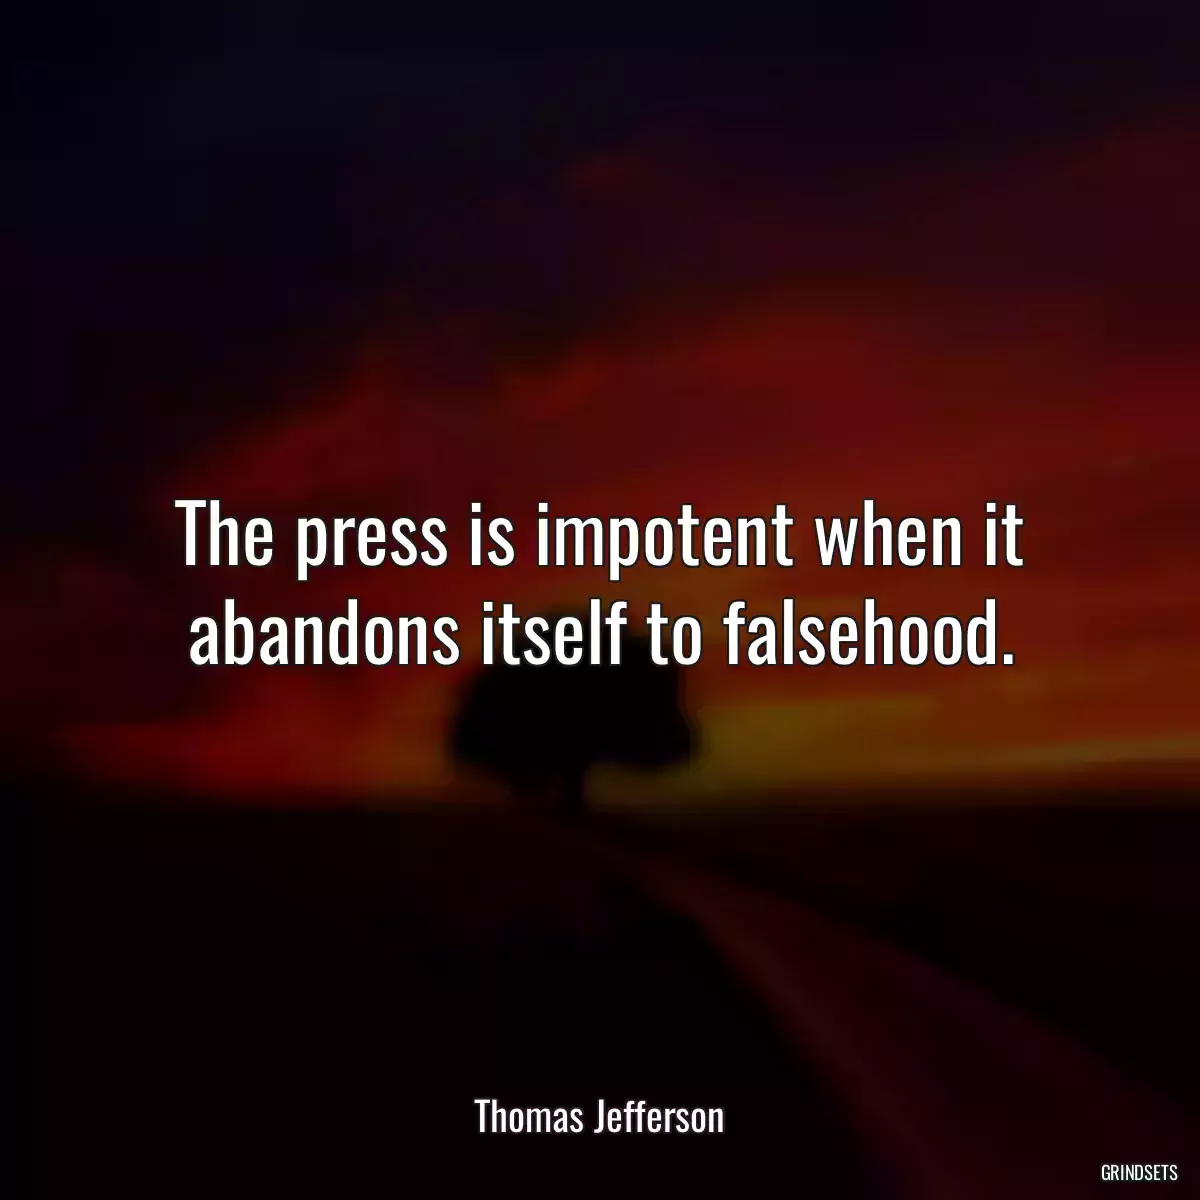 The press is impotent when it abandons itself to falsehood.